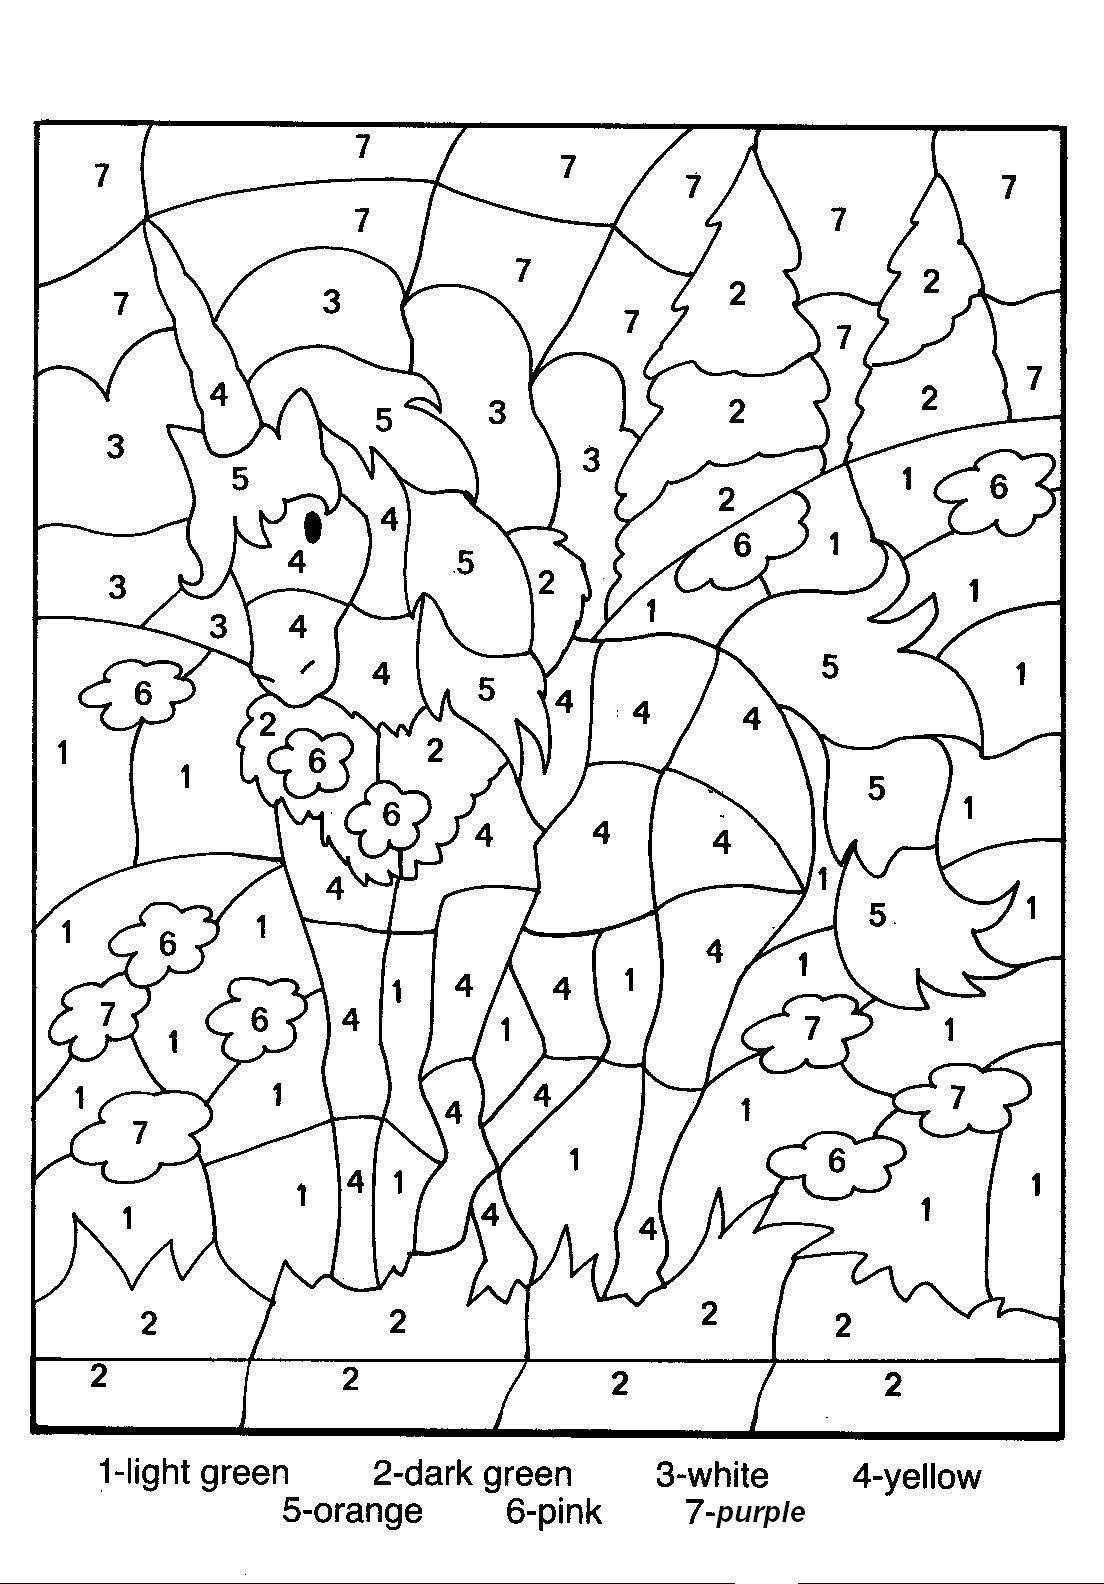 Free Printable Colornumber Coloring Pages | Colornumber - Free Printable Paint By Number Coloring Pages